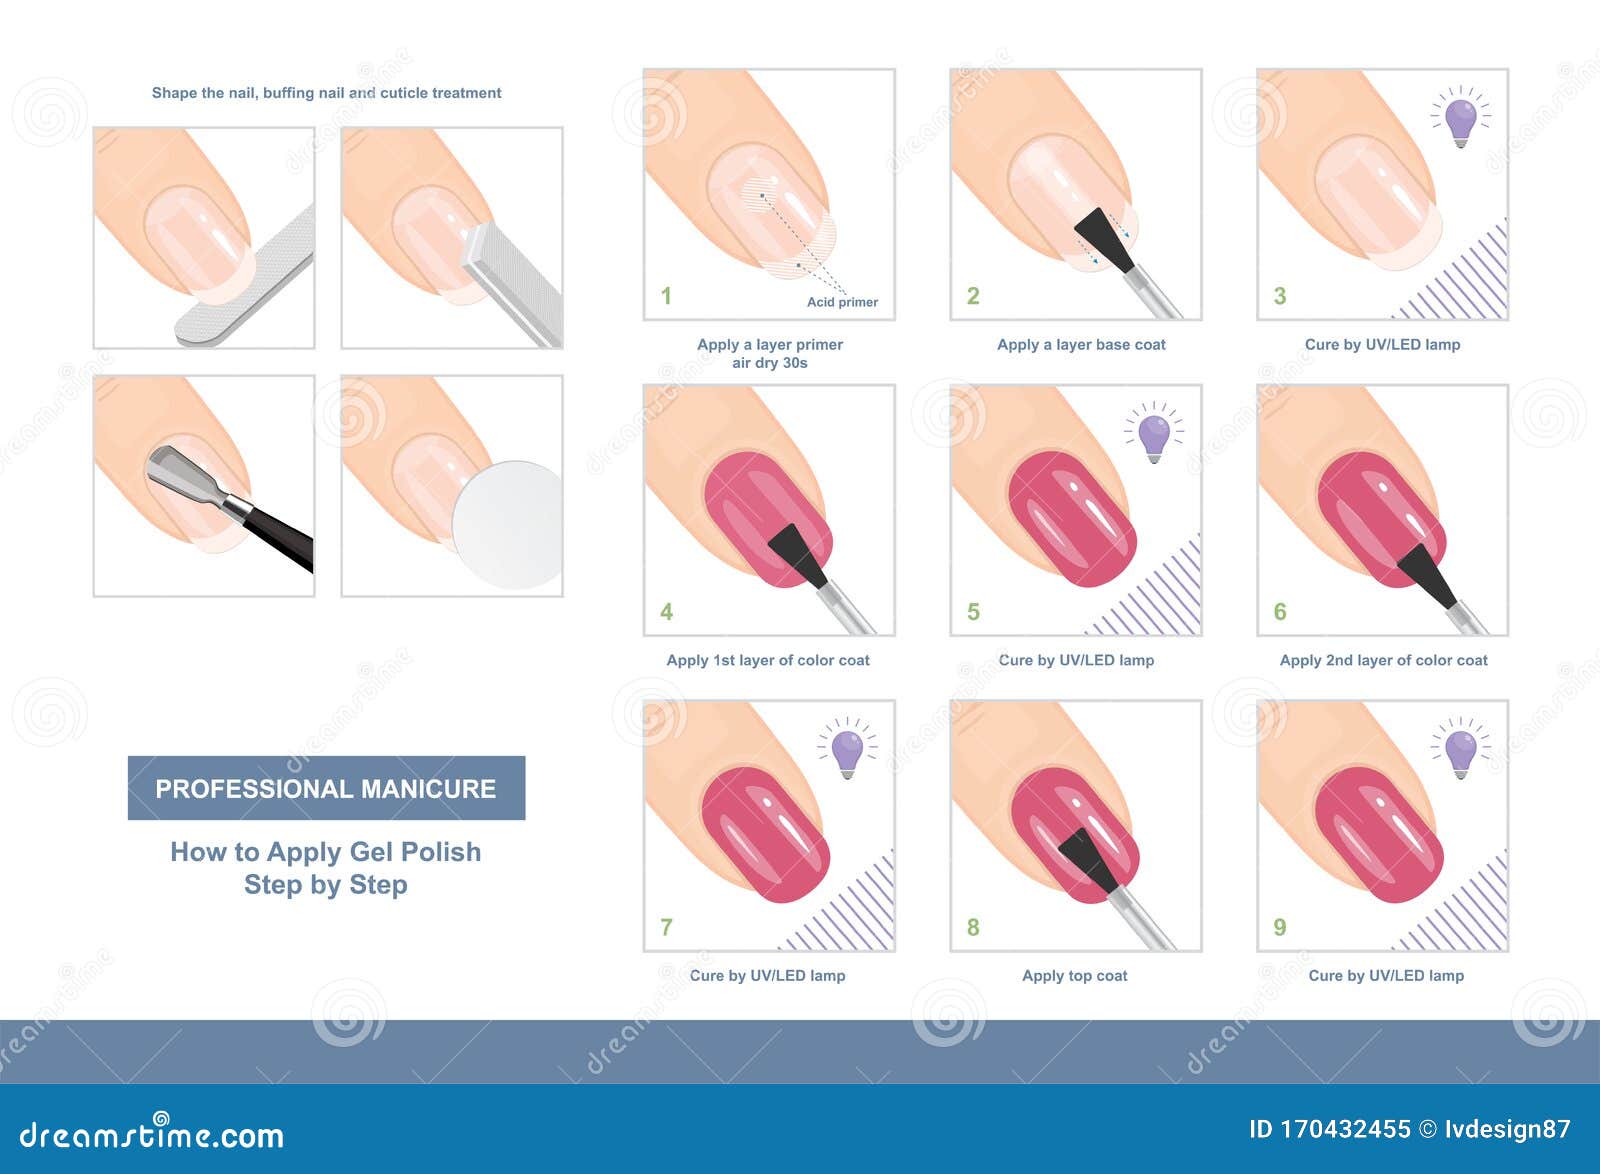 Step-by-Step Guide to Making a Professional Nail Art Video - wide 8